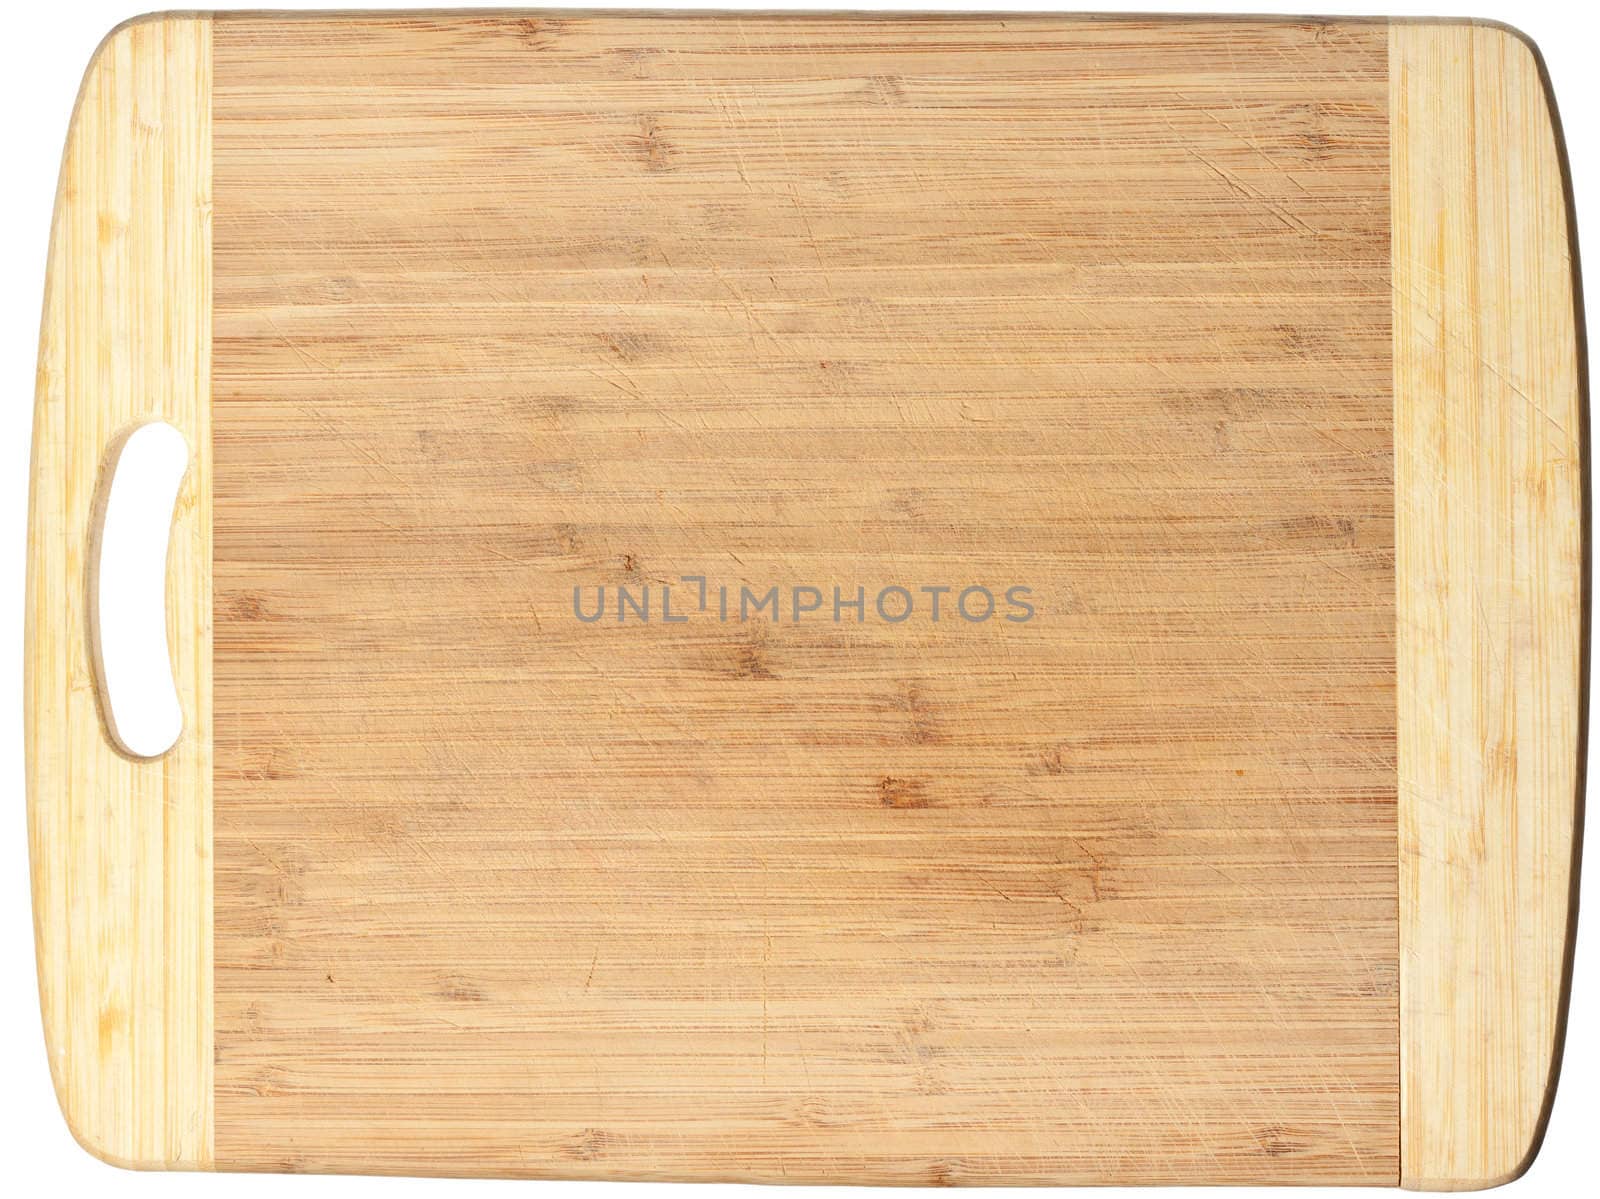 Isolated used wooden cutting board. Clipping path included